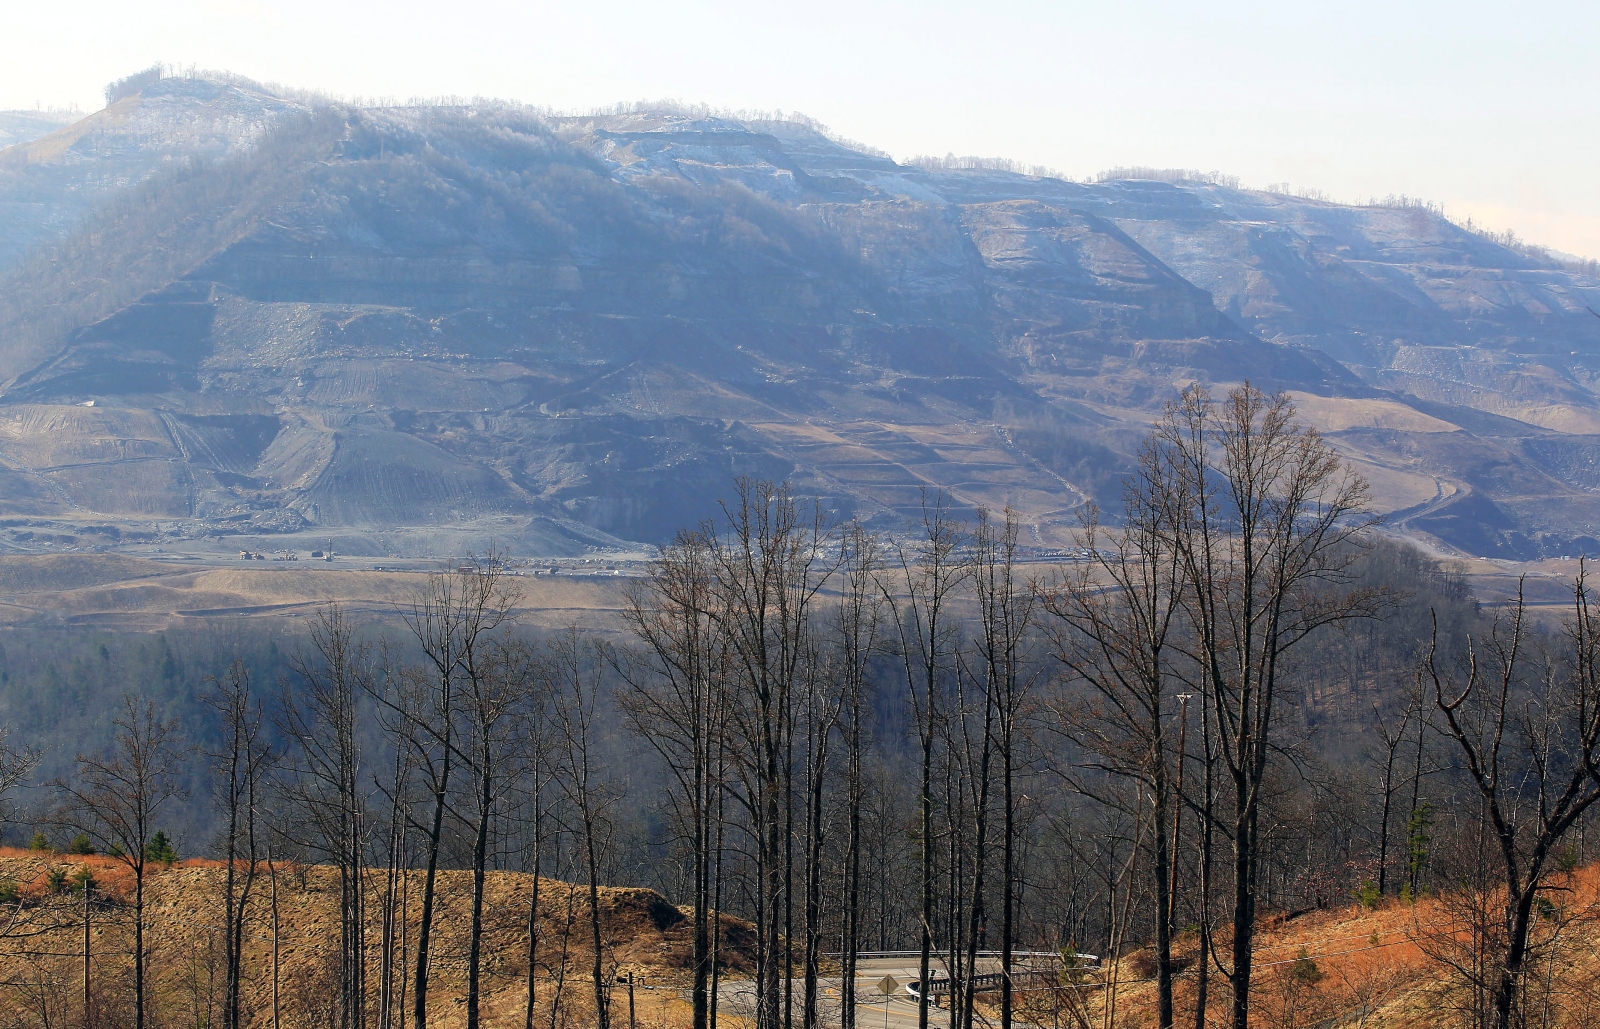 The view of some sparse trees, a road, and a mountain gutted by coal mining.